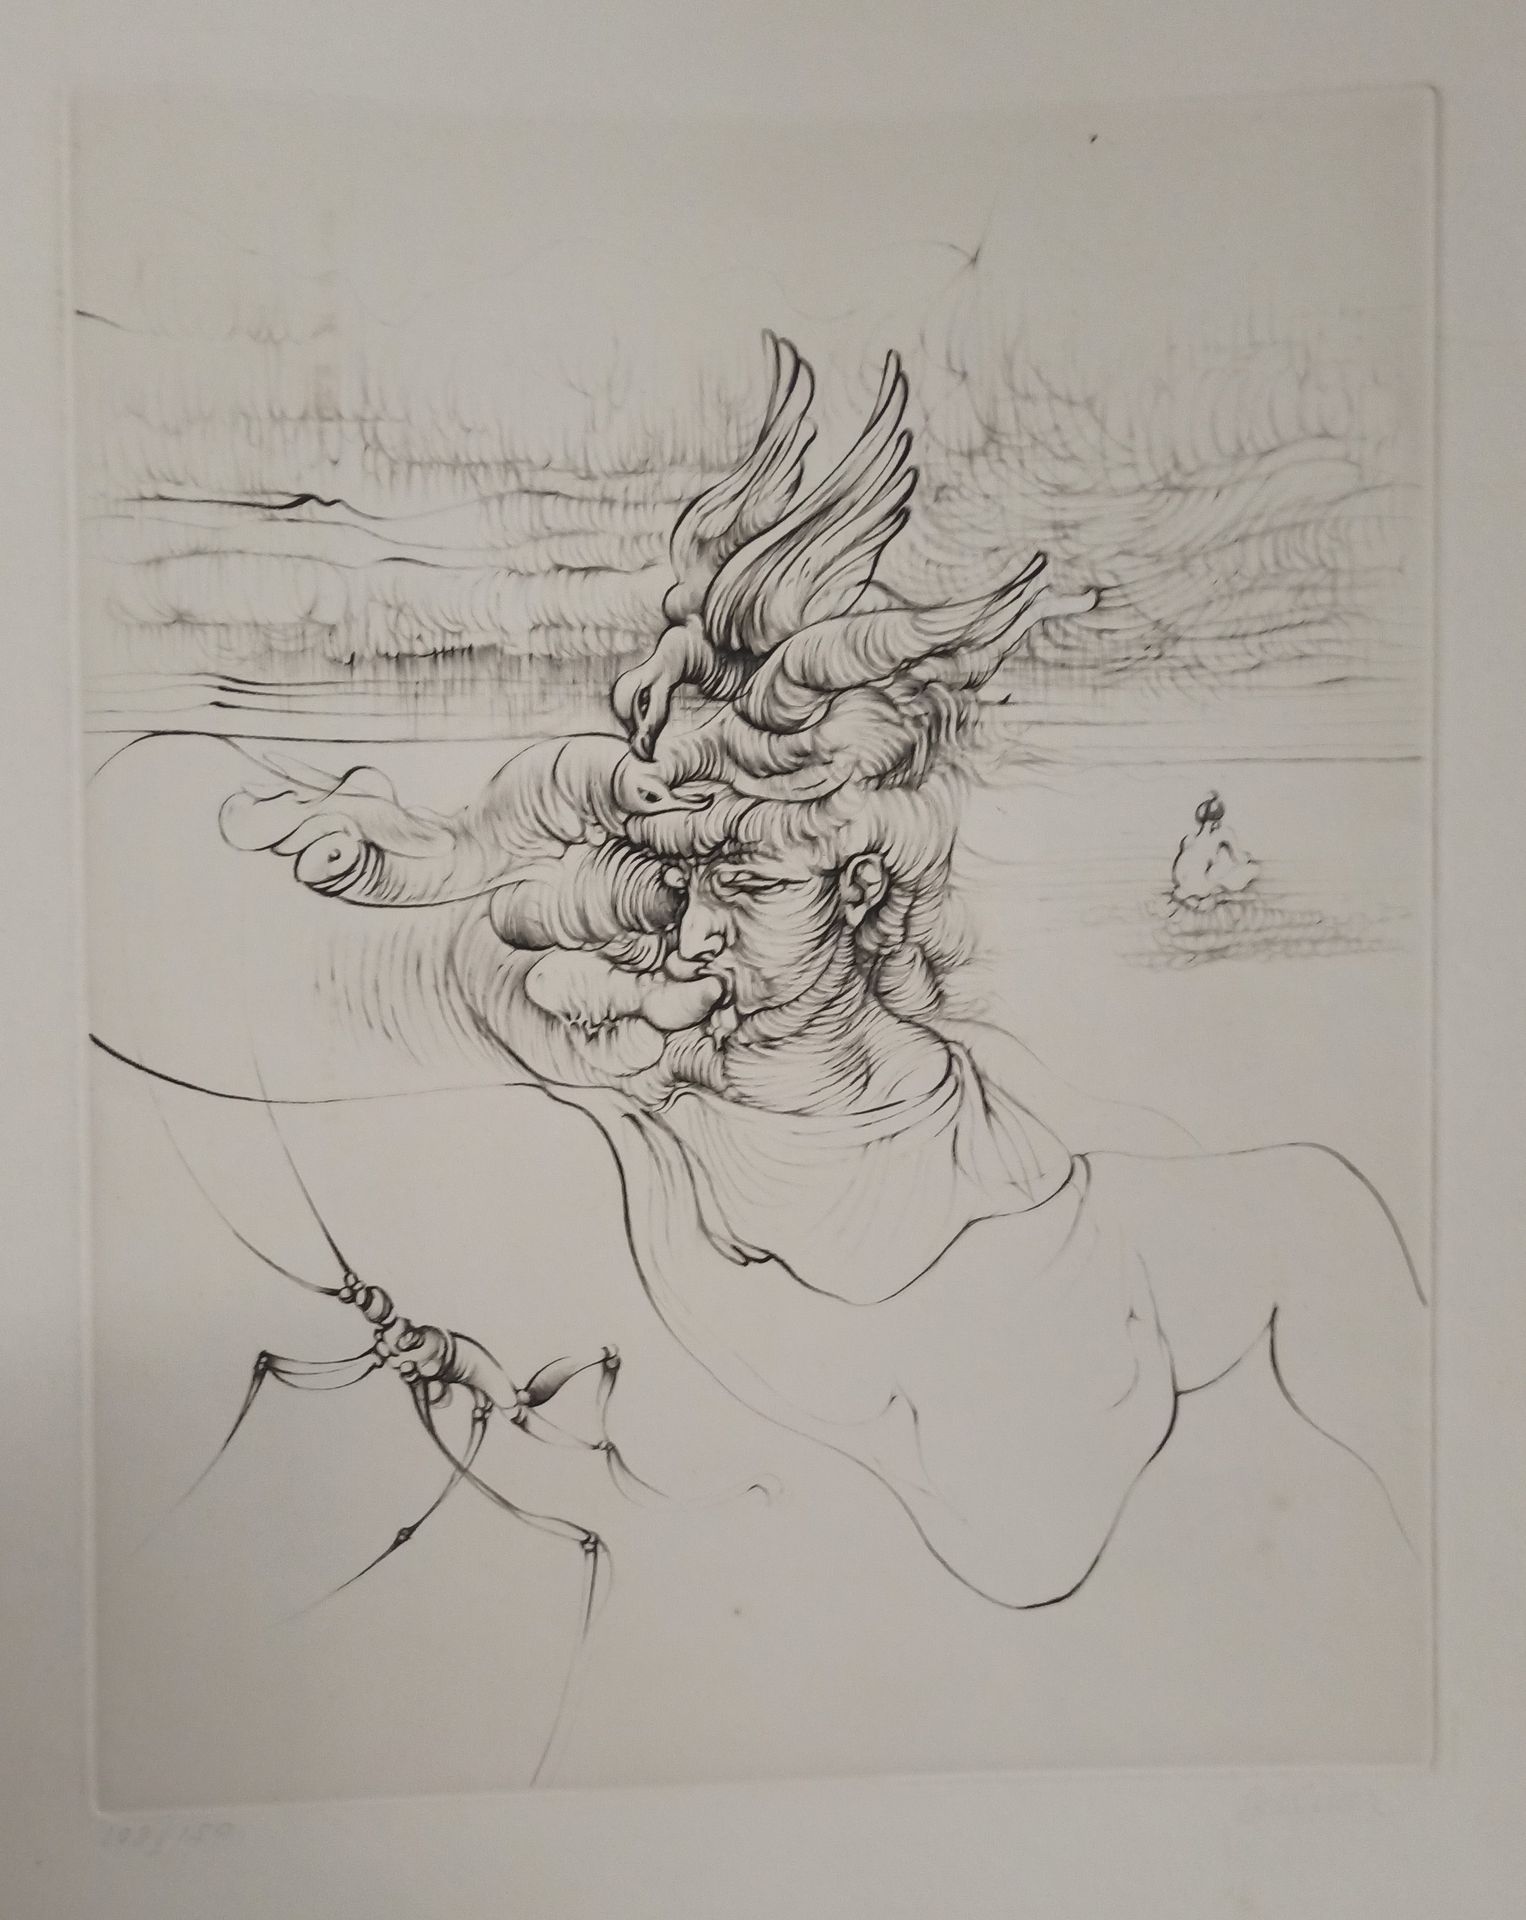 Null Hans BELLMER (1902-1975)

Untitled

Engraving signed and numbered 109/150.
&hellip;